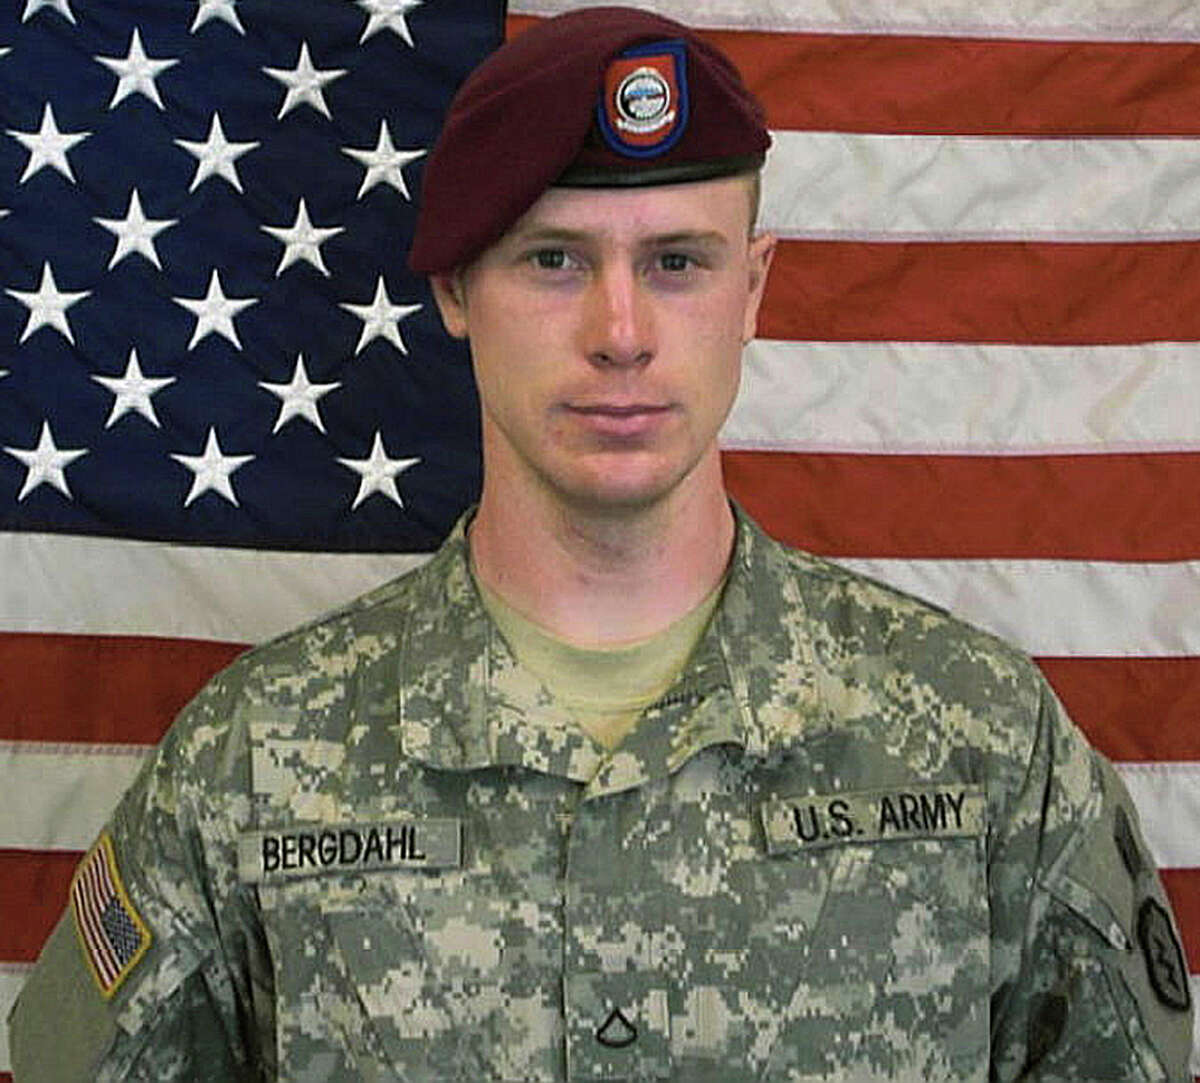 FILE - This undated file image provided by the U.S. Army shows Sgt. Bowe Bergdahl, the soldier held prisoner for years by the Taliban after leaving his post in Afghanistan. The popular podcast ?“Serial?” is featuring interviews with Bergdahl in which he talks about his decision to leave his military base in Afghanistan, his subsequent 5-year imprisonment by the Taliban and the prisoner swap that secured his return to the United States. (AP Photo/U.S. Army, file)